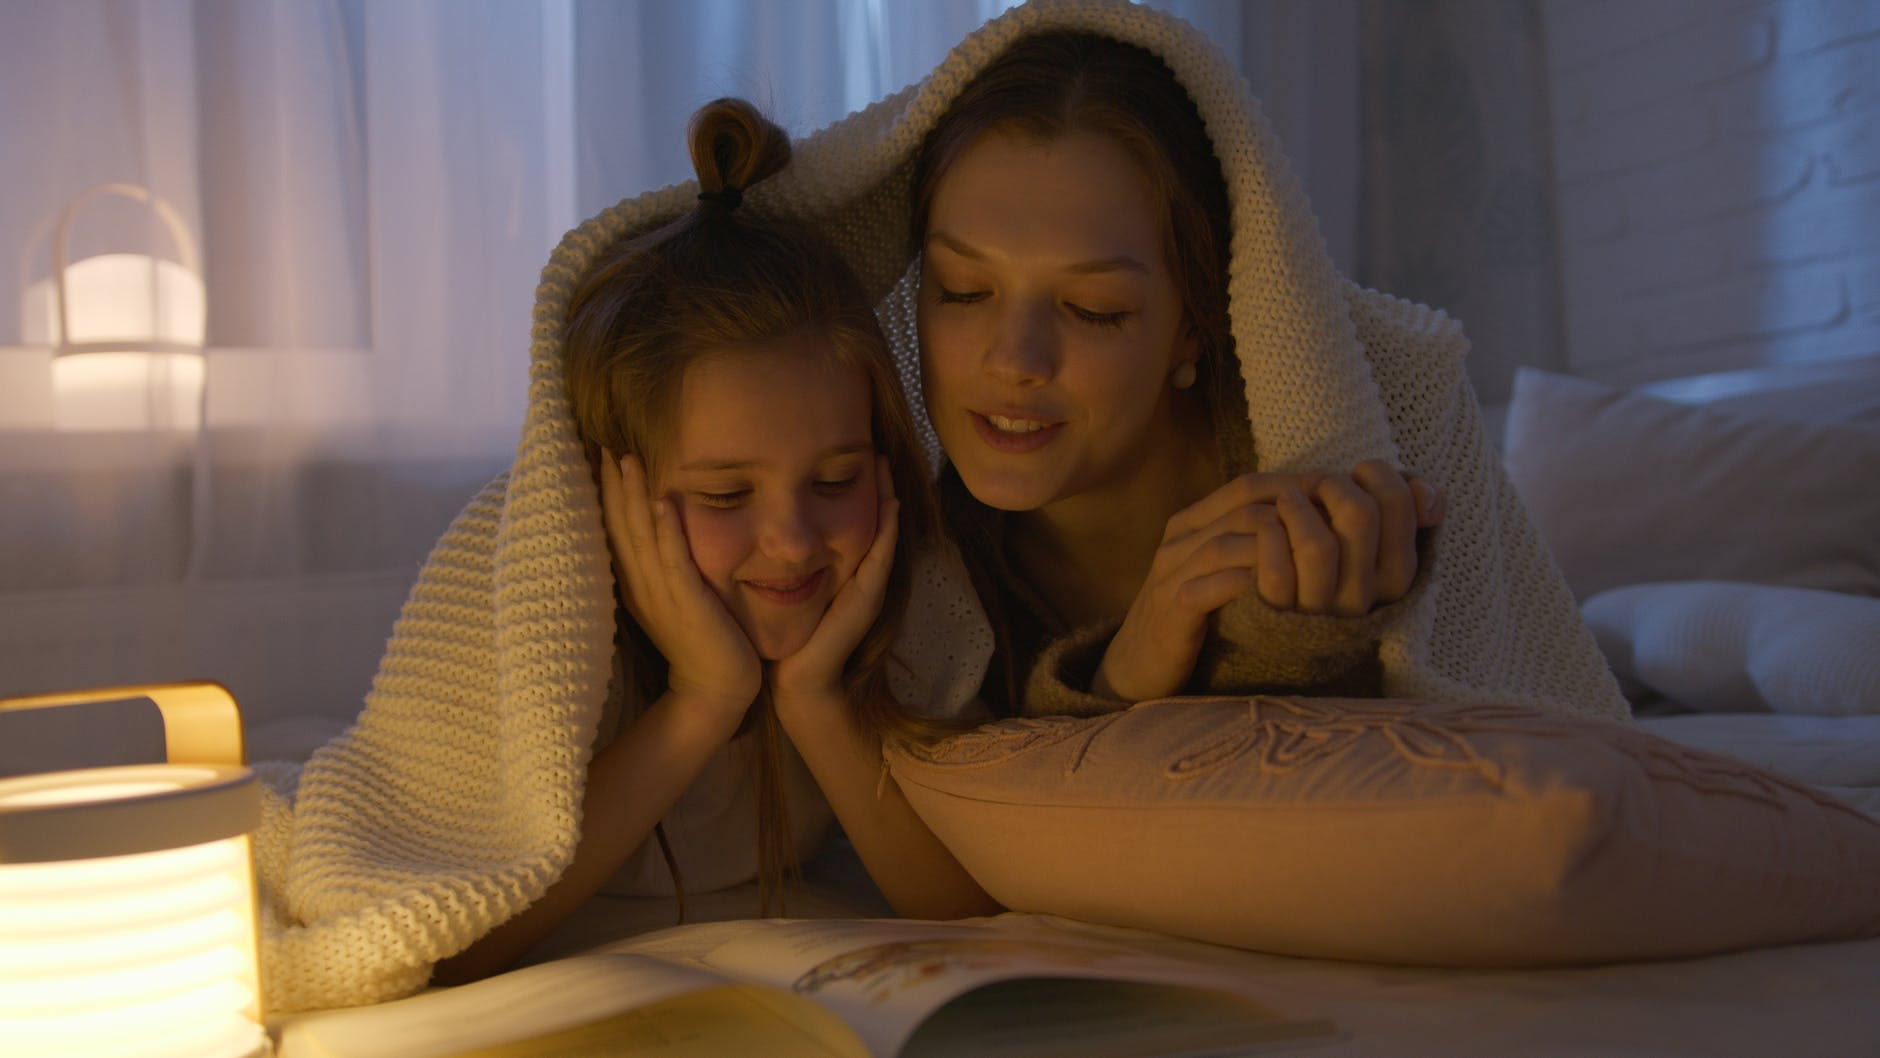 Using Bedtime Stories to Create a More Positive and Loving World